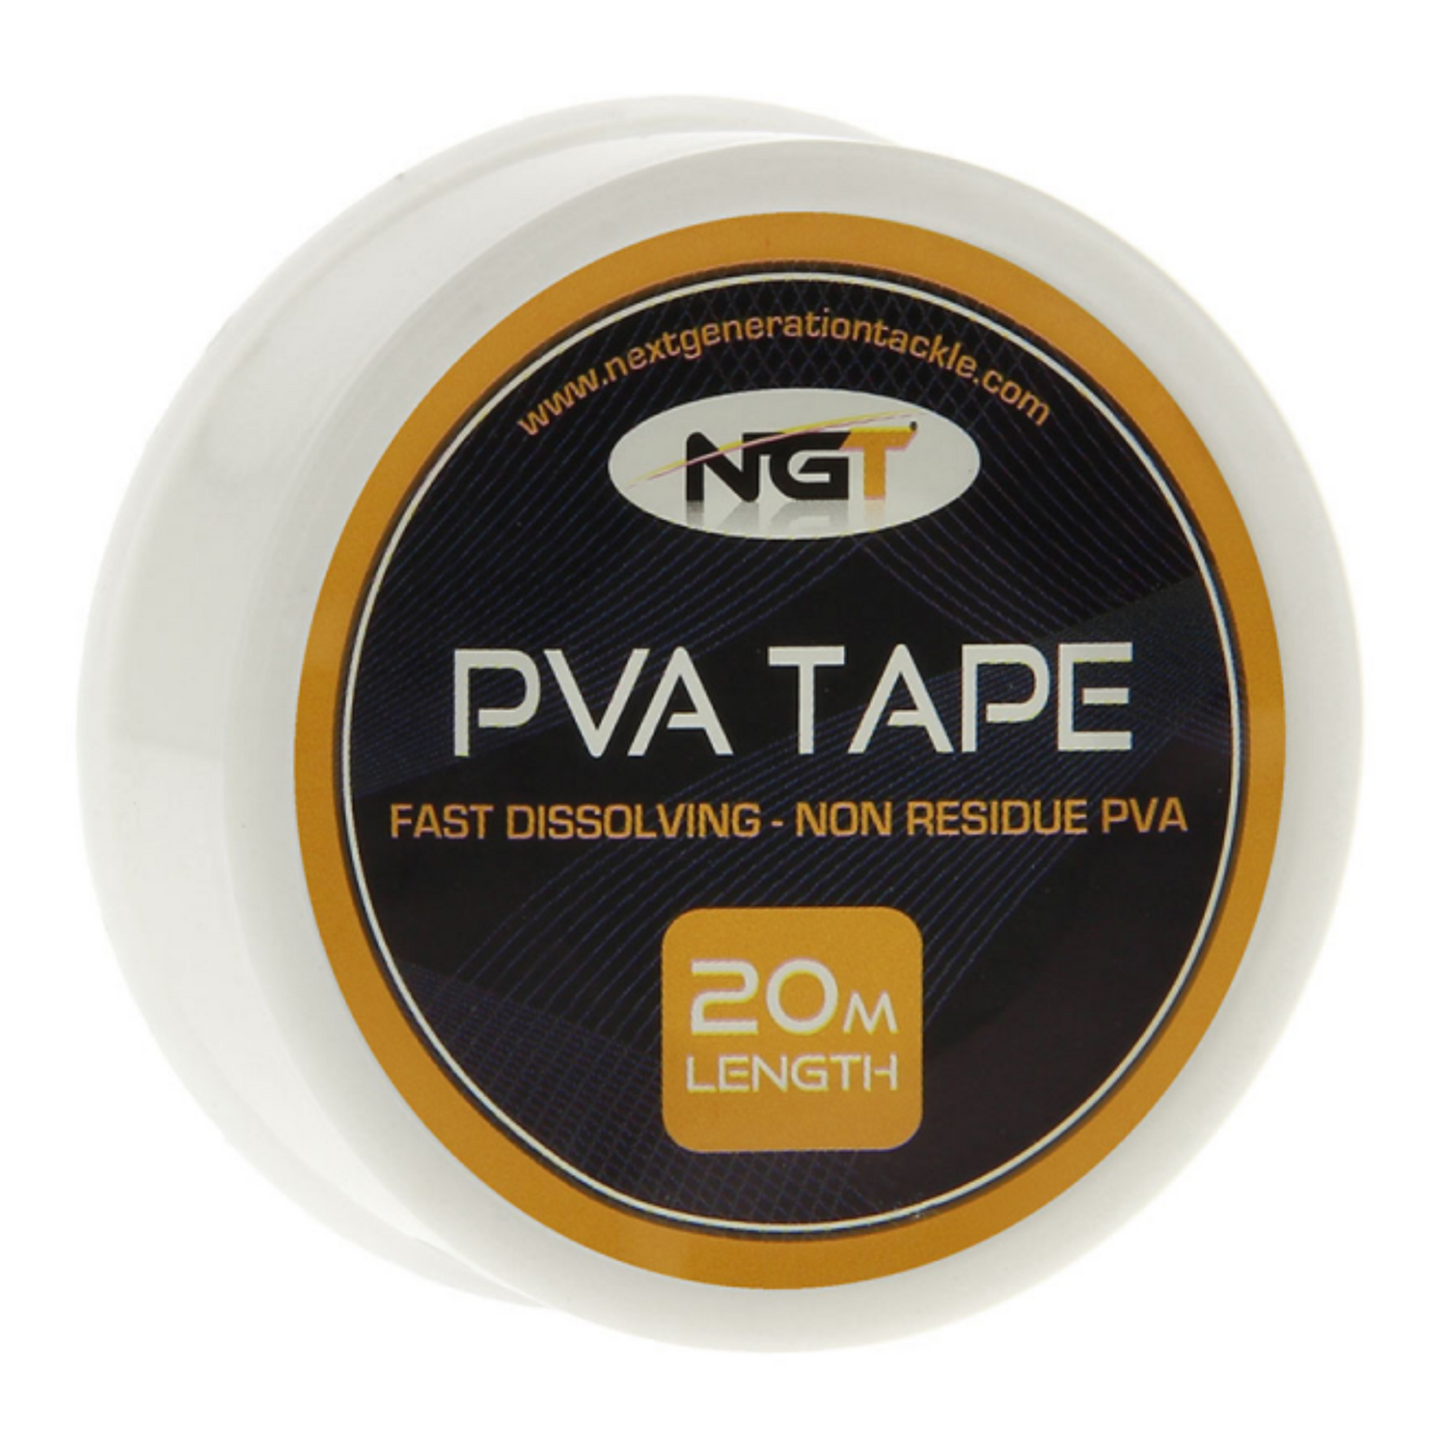 NGT PVA Bundle Pack - 45pc Complete PVA Set + NGT PVA Luggage Station - Ideal Gift